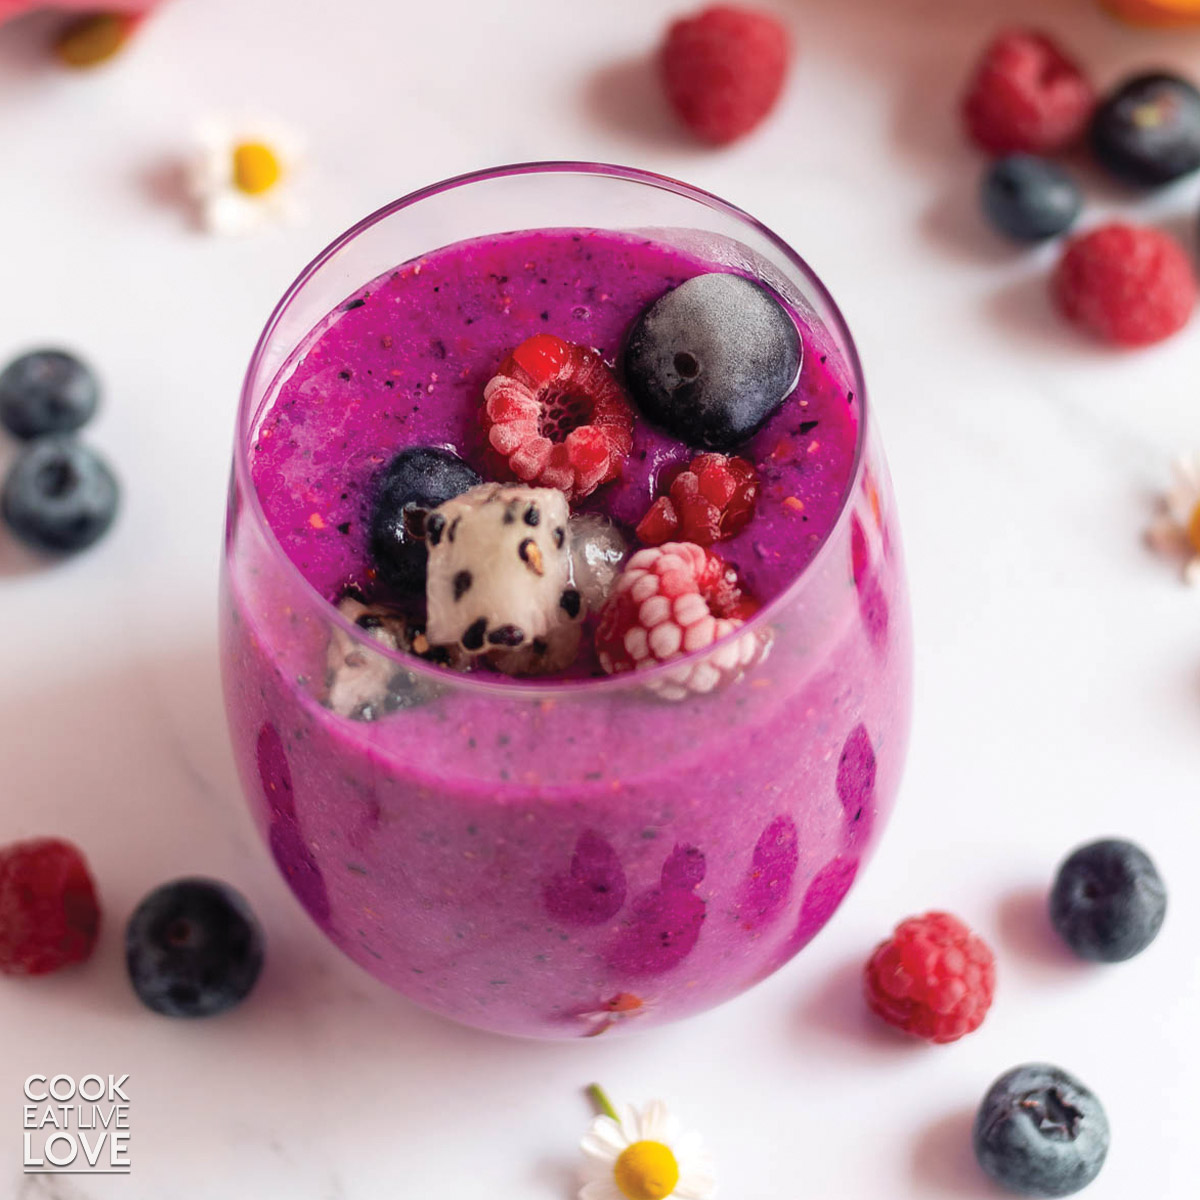 Dragon Fruit Smoothie - Cook Eat Live Love